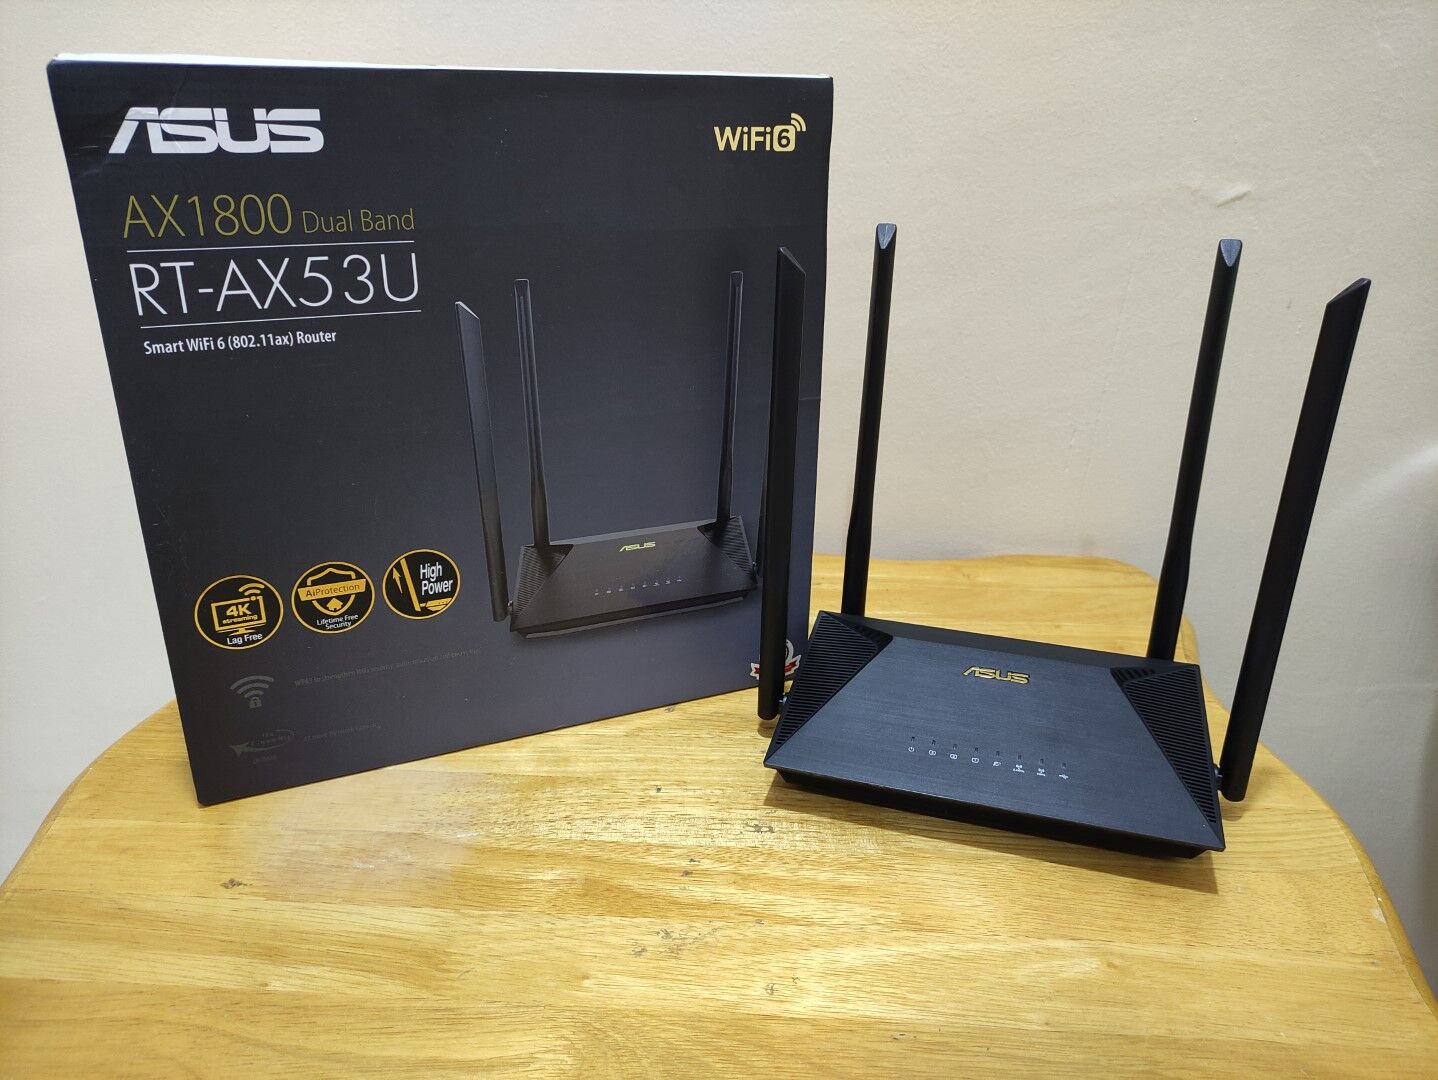 ASUS AX1800 Dual Band Router Review – Pokde.Net